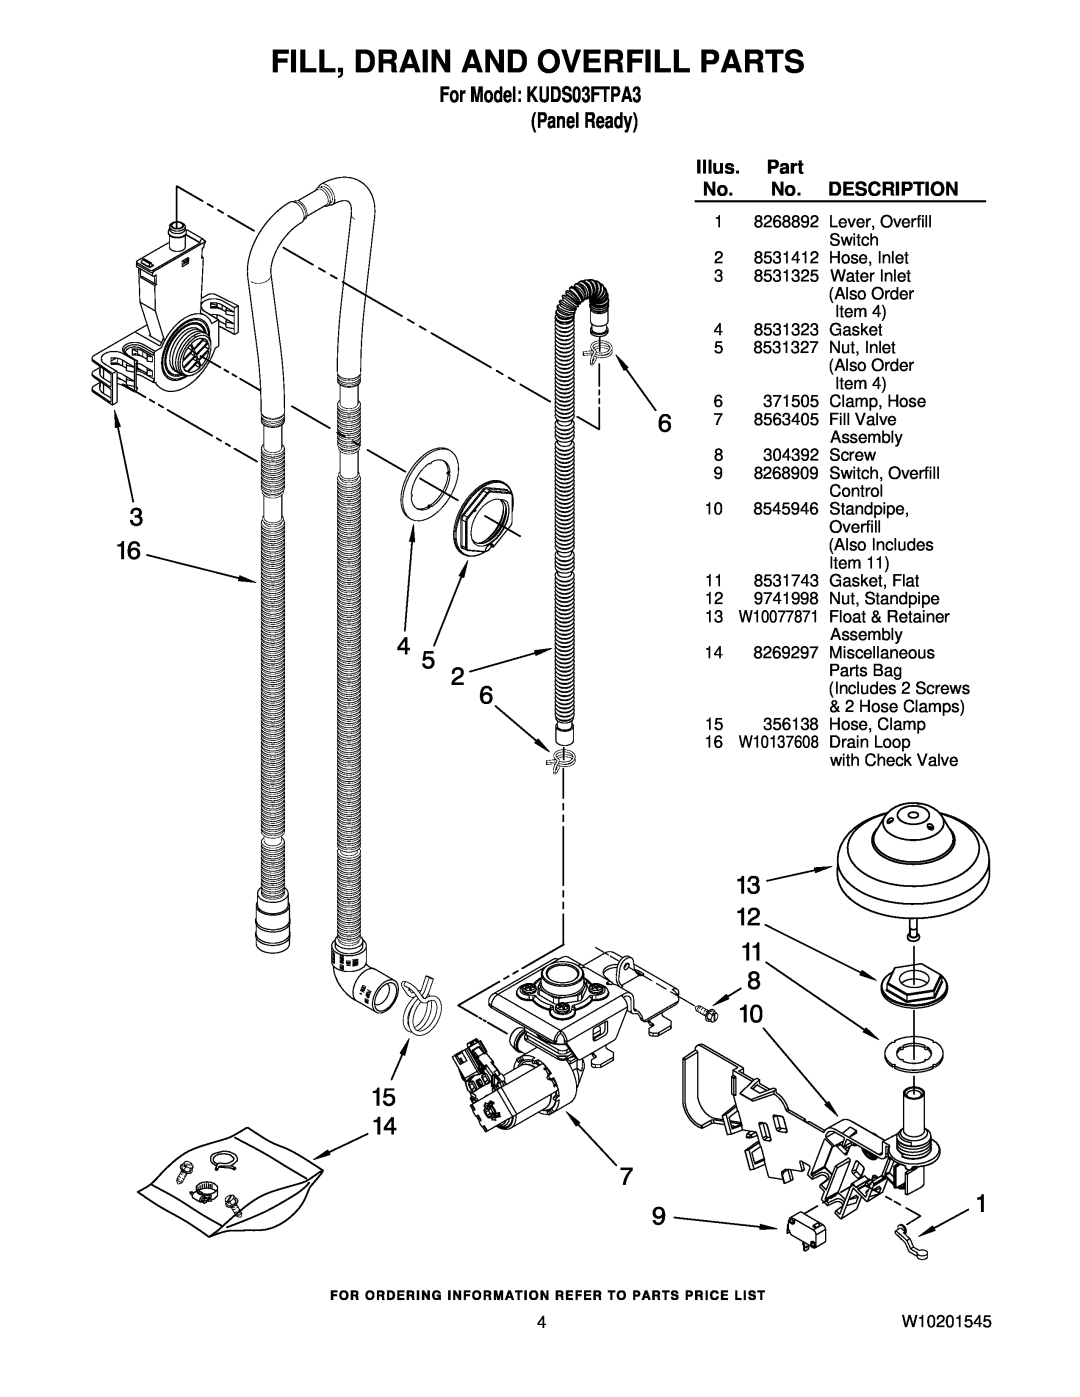 KitchenAid manual Fill, Drain And Overfill Parts, Illus. Part, For Model KUDS03FTPA3 Panel Ready, Description, W10077871 